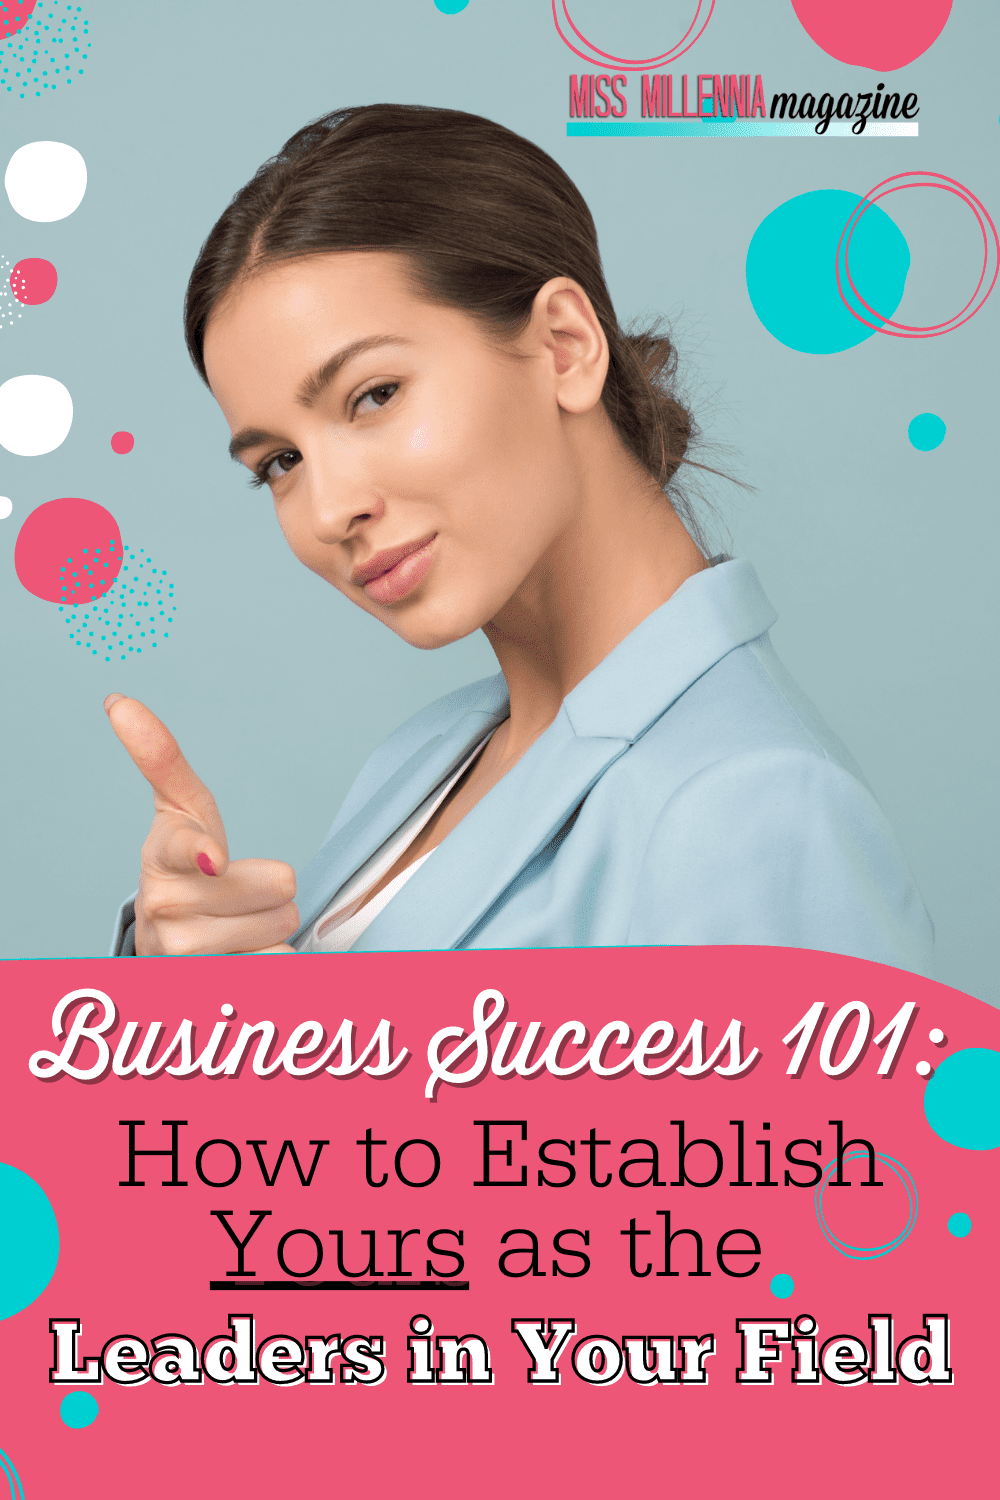 Business 101: How to Establish Yours as the Leaders in Your Field